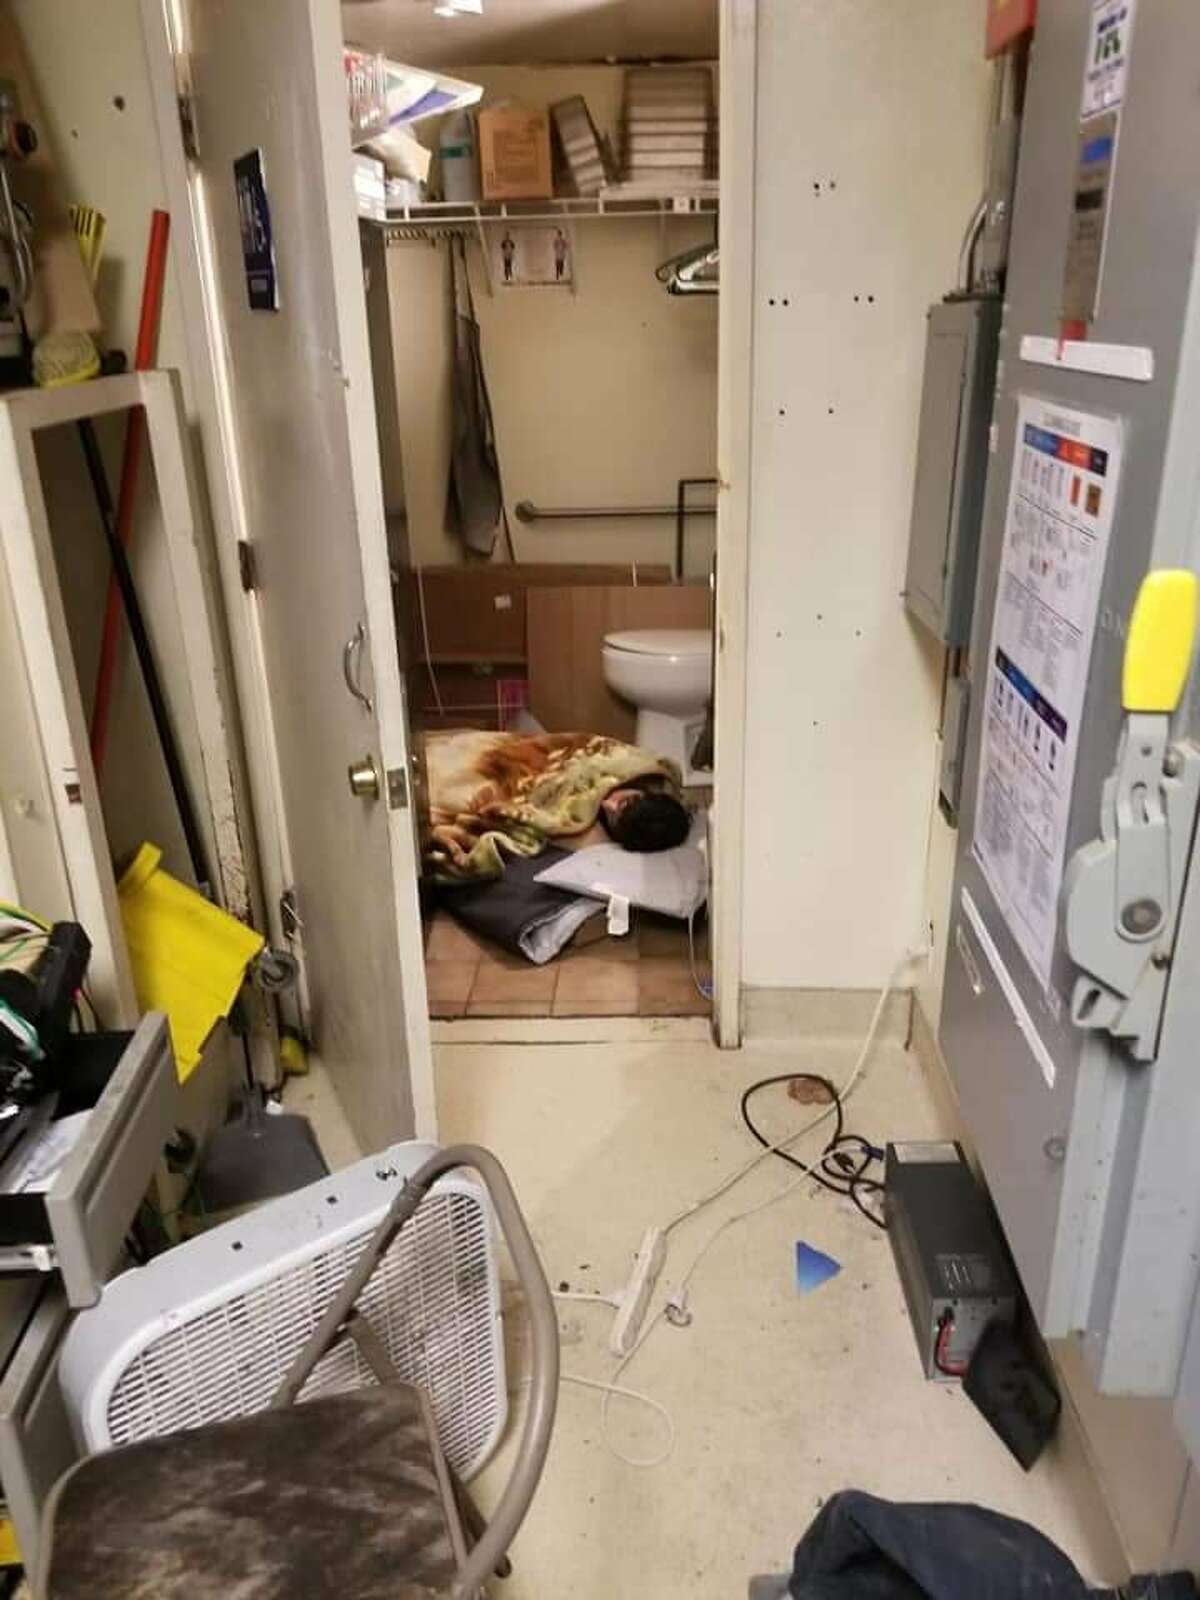 On Sunday, a Reddit moderator shared this photo allegedly showing an employee of Papa Murphy's at 330 Palmetto Avenue in Pacifica sleeping on a bathroom floor while the shop was open for business.